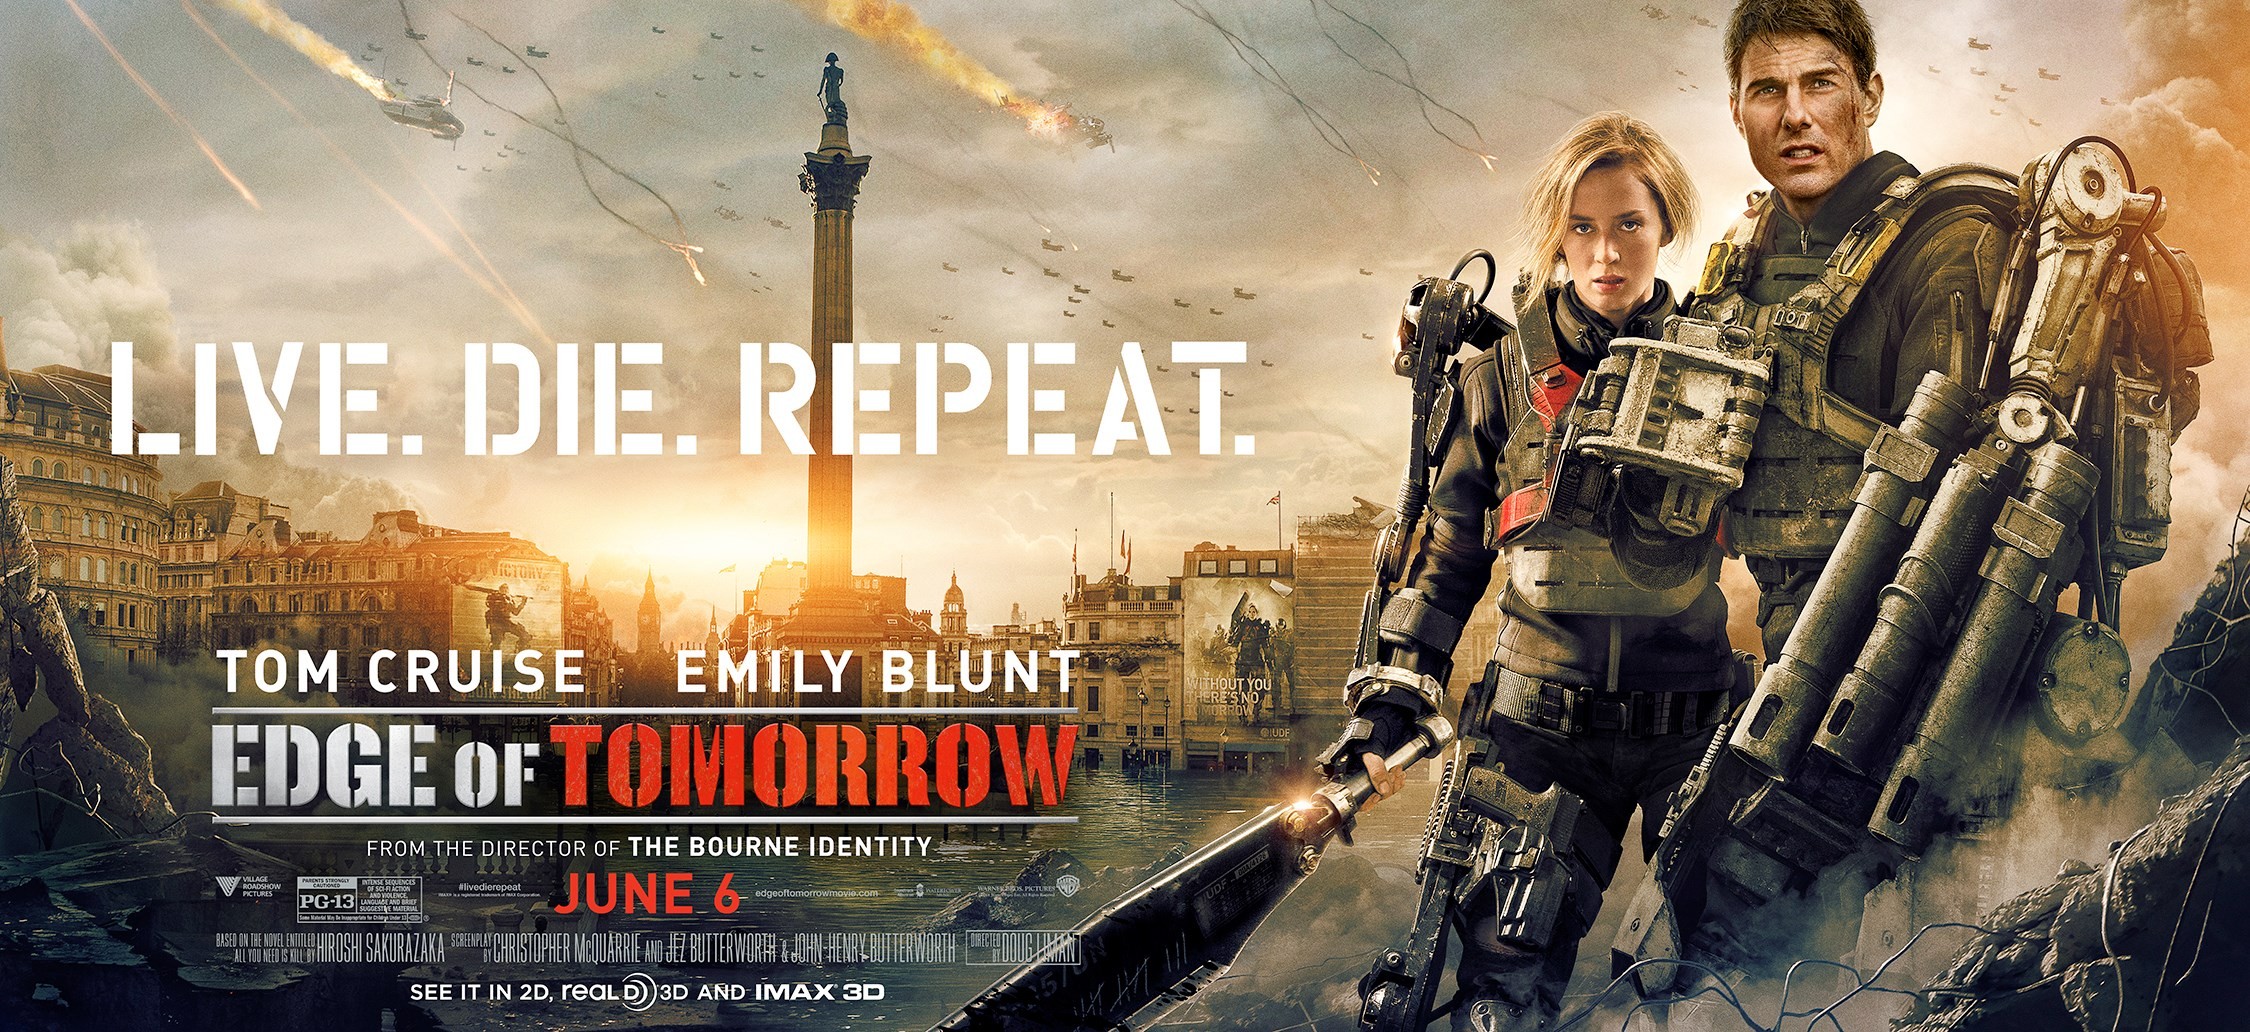 Mega Sized Movie Poster Image for Edge of Tomorrow (#8 of 17)